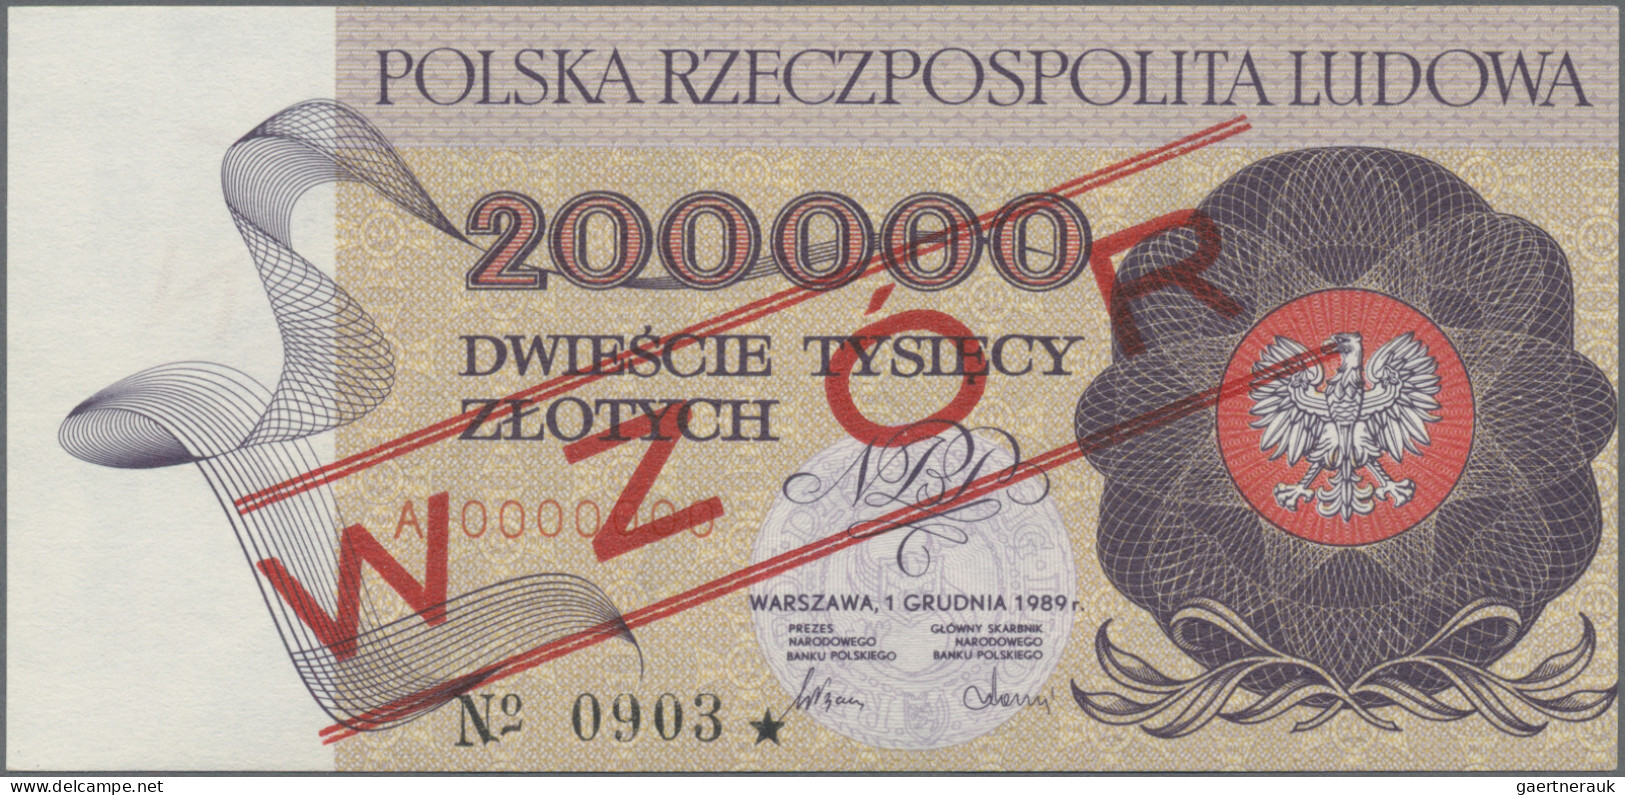 Poland - Bank Notes: Narodowy Bank Polski, Pair With 200.000 Zlotych 1989 And 20 - Poland